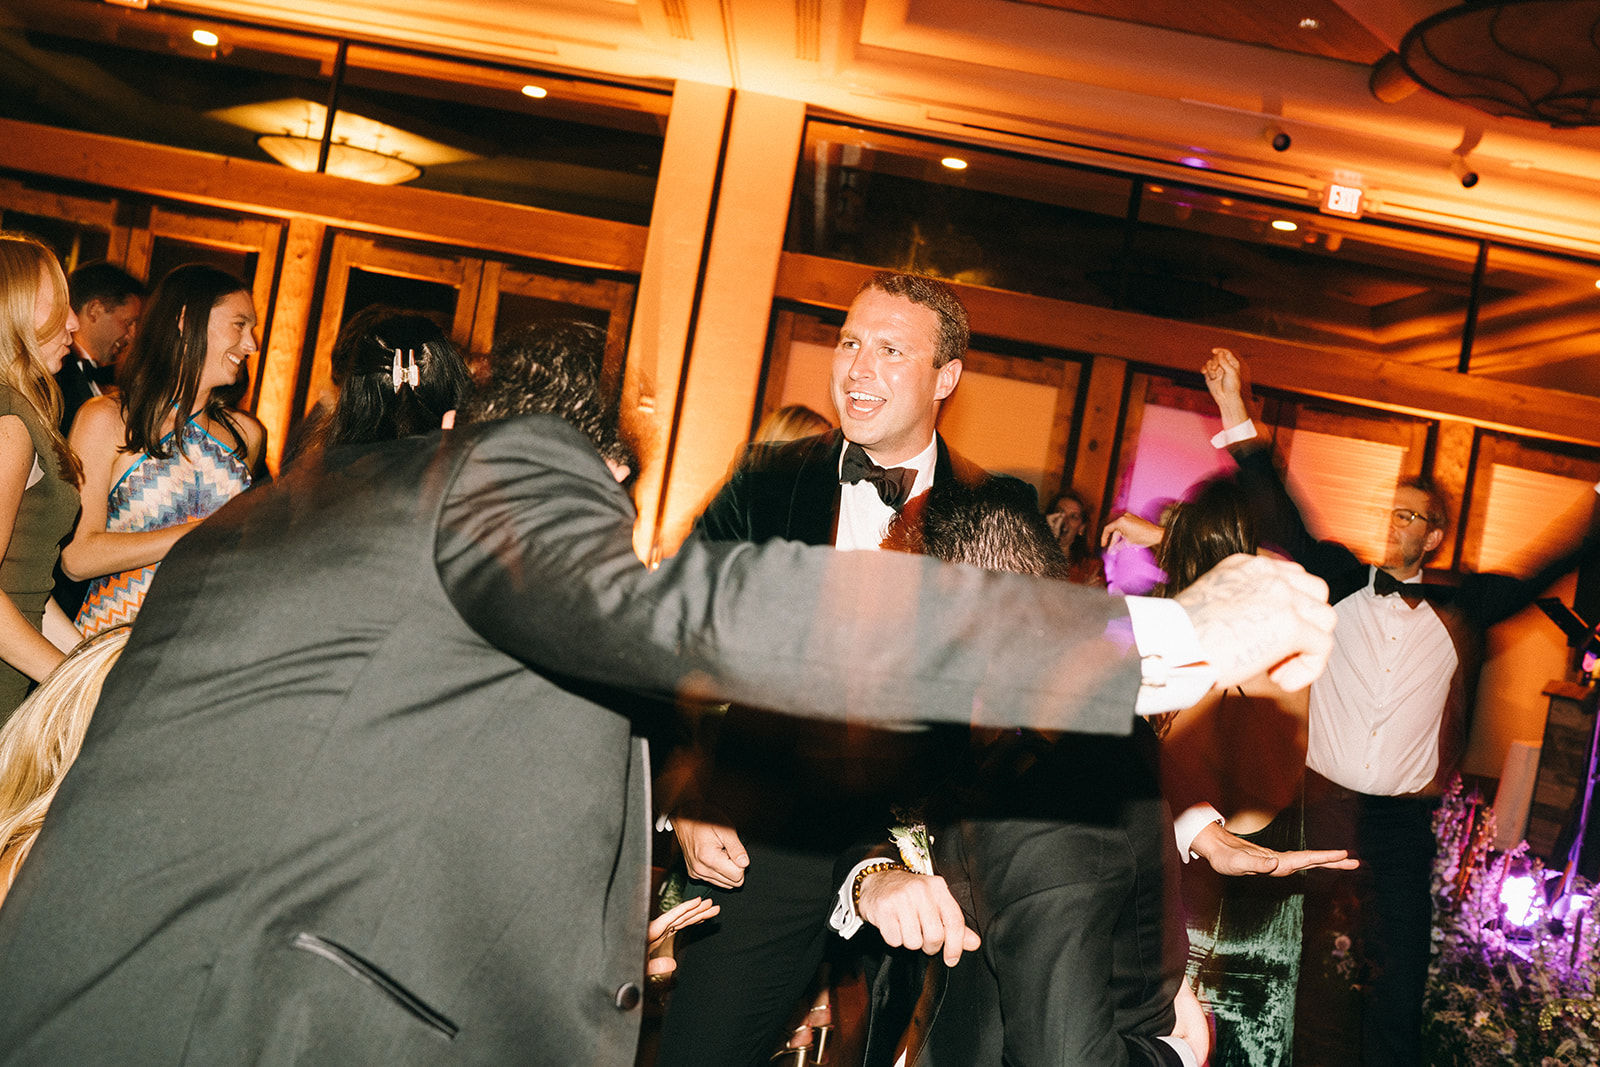 Groom and wedding guests dancing and laughing with their hands in the air